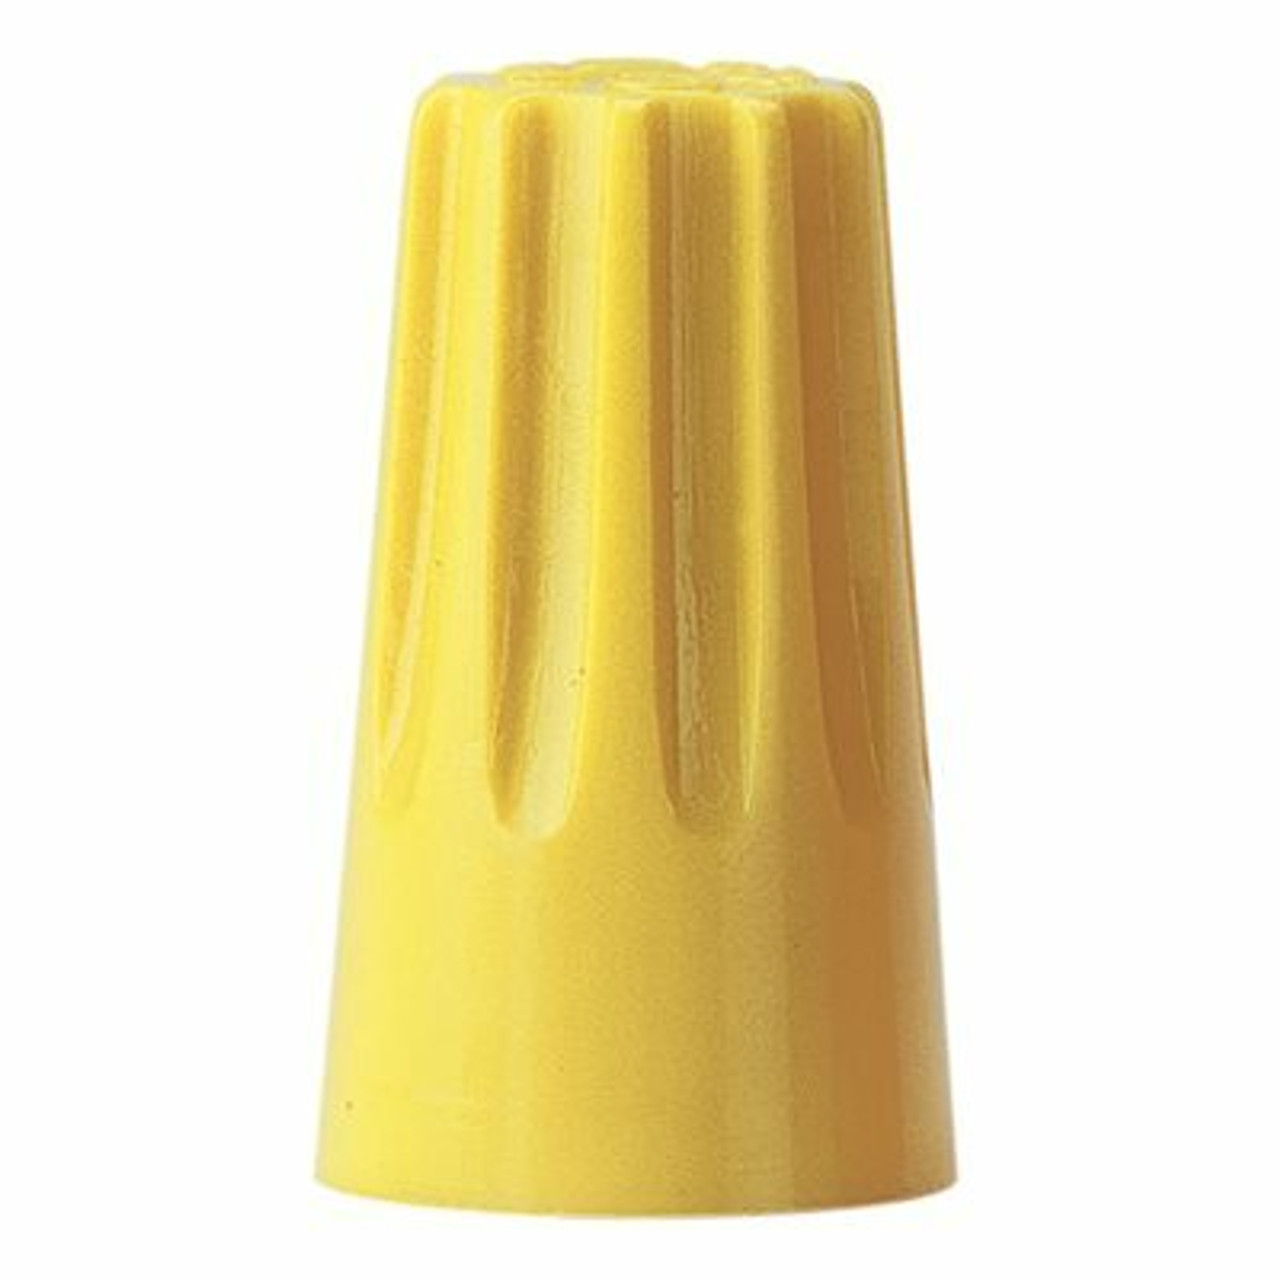 Preferred Industries Wire Connector, Yellow (100-Pack)